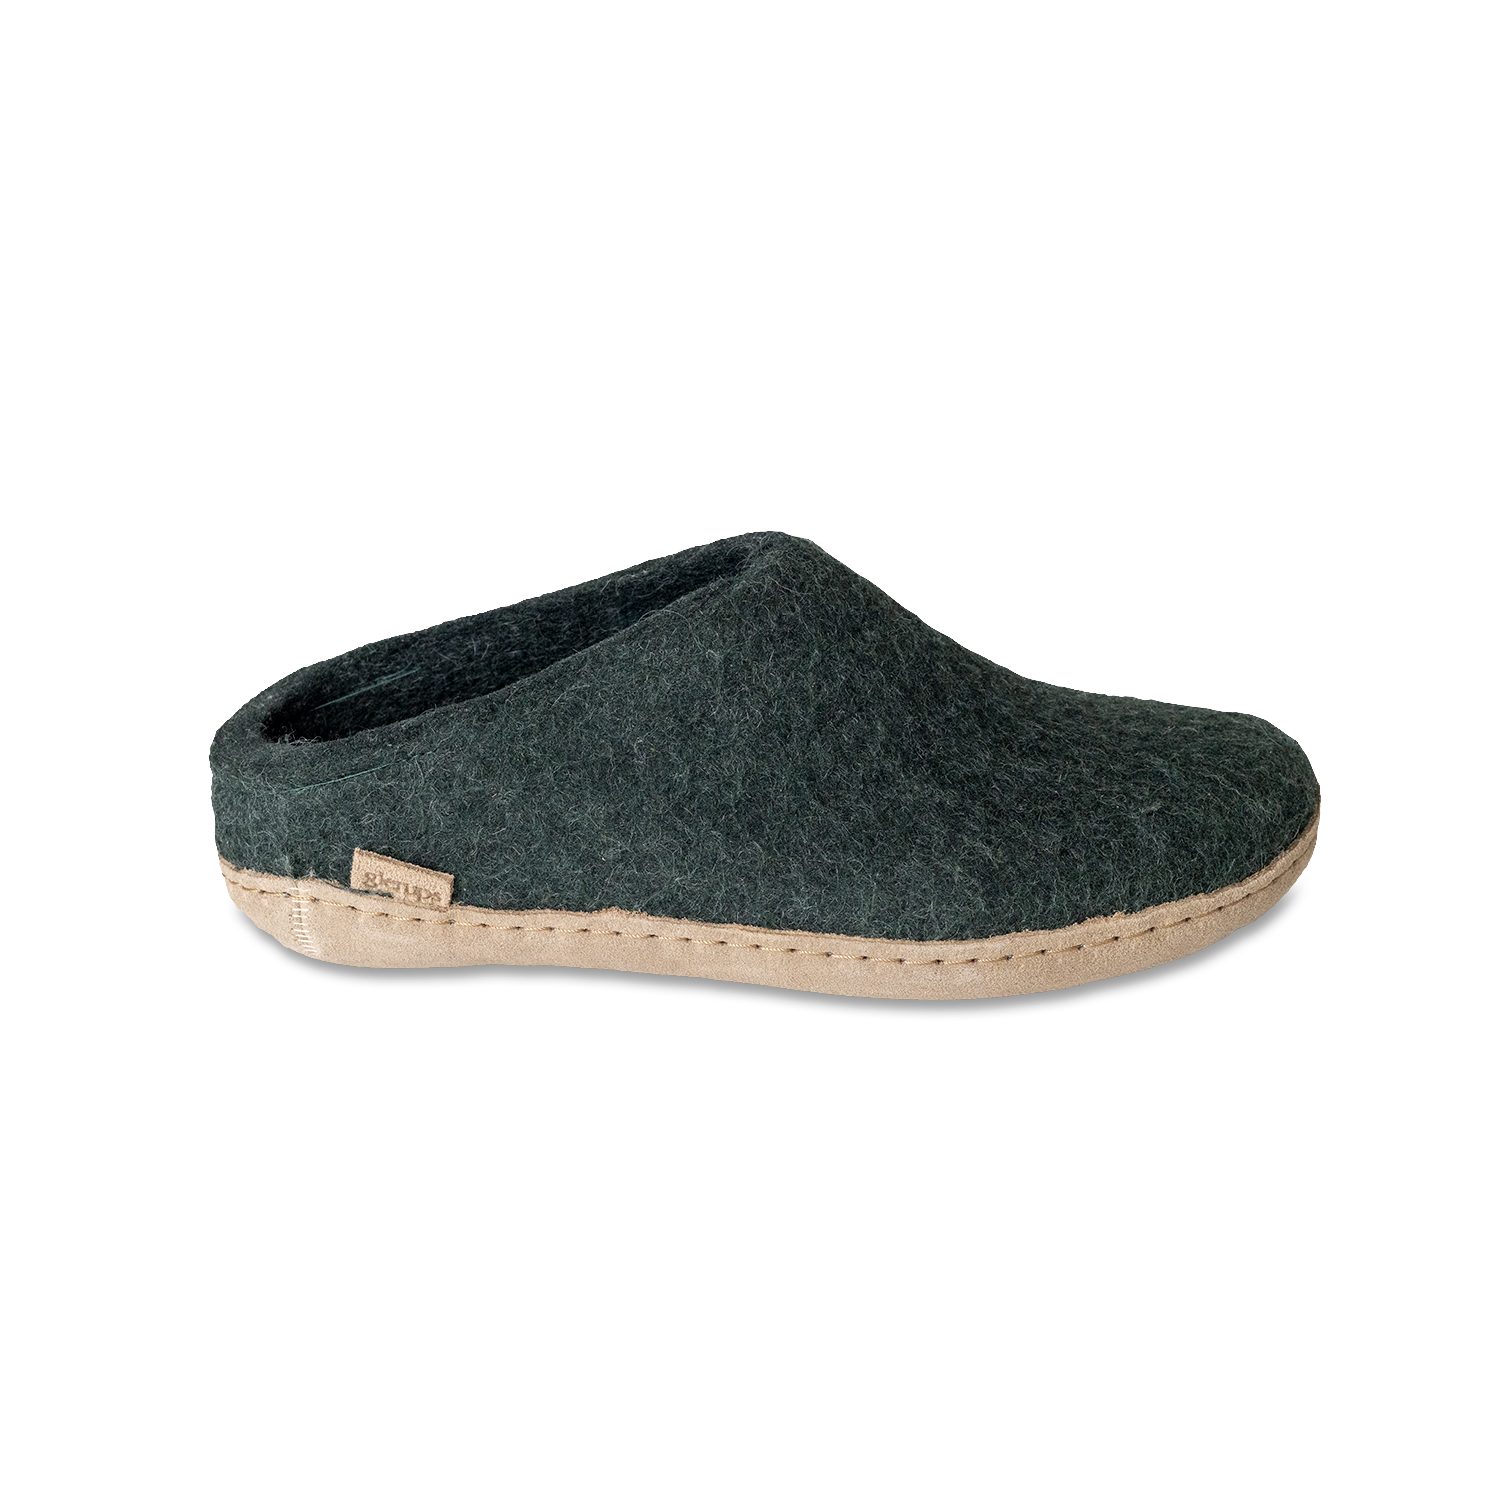 Glerups Slip-on Forest Green - Leather Sole